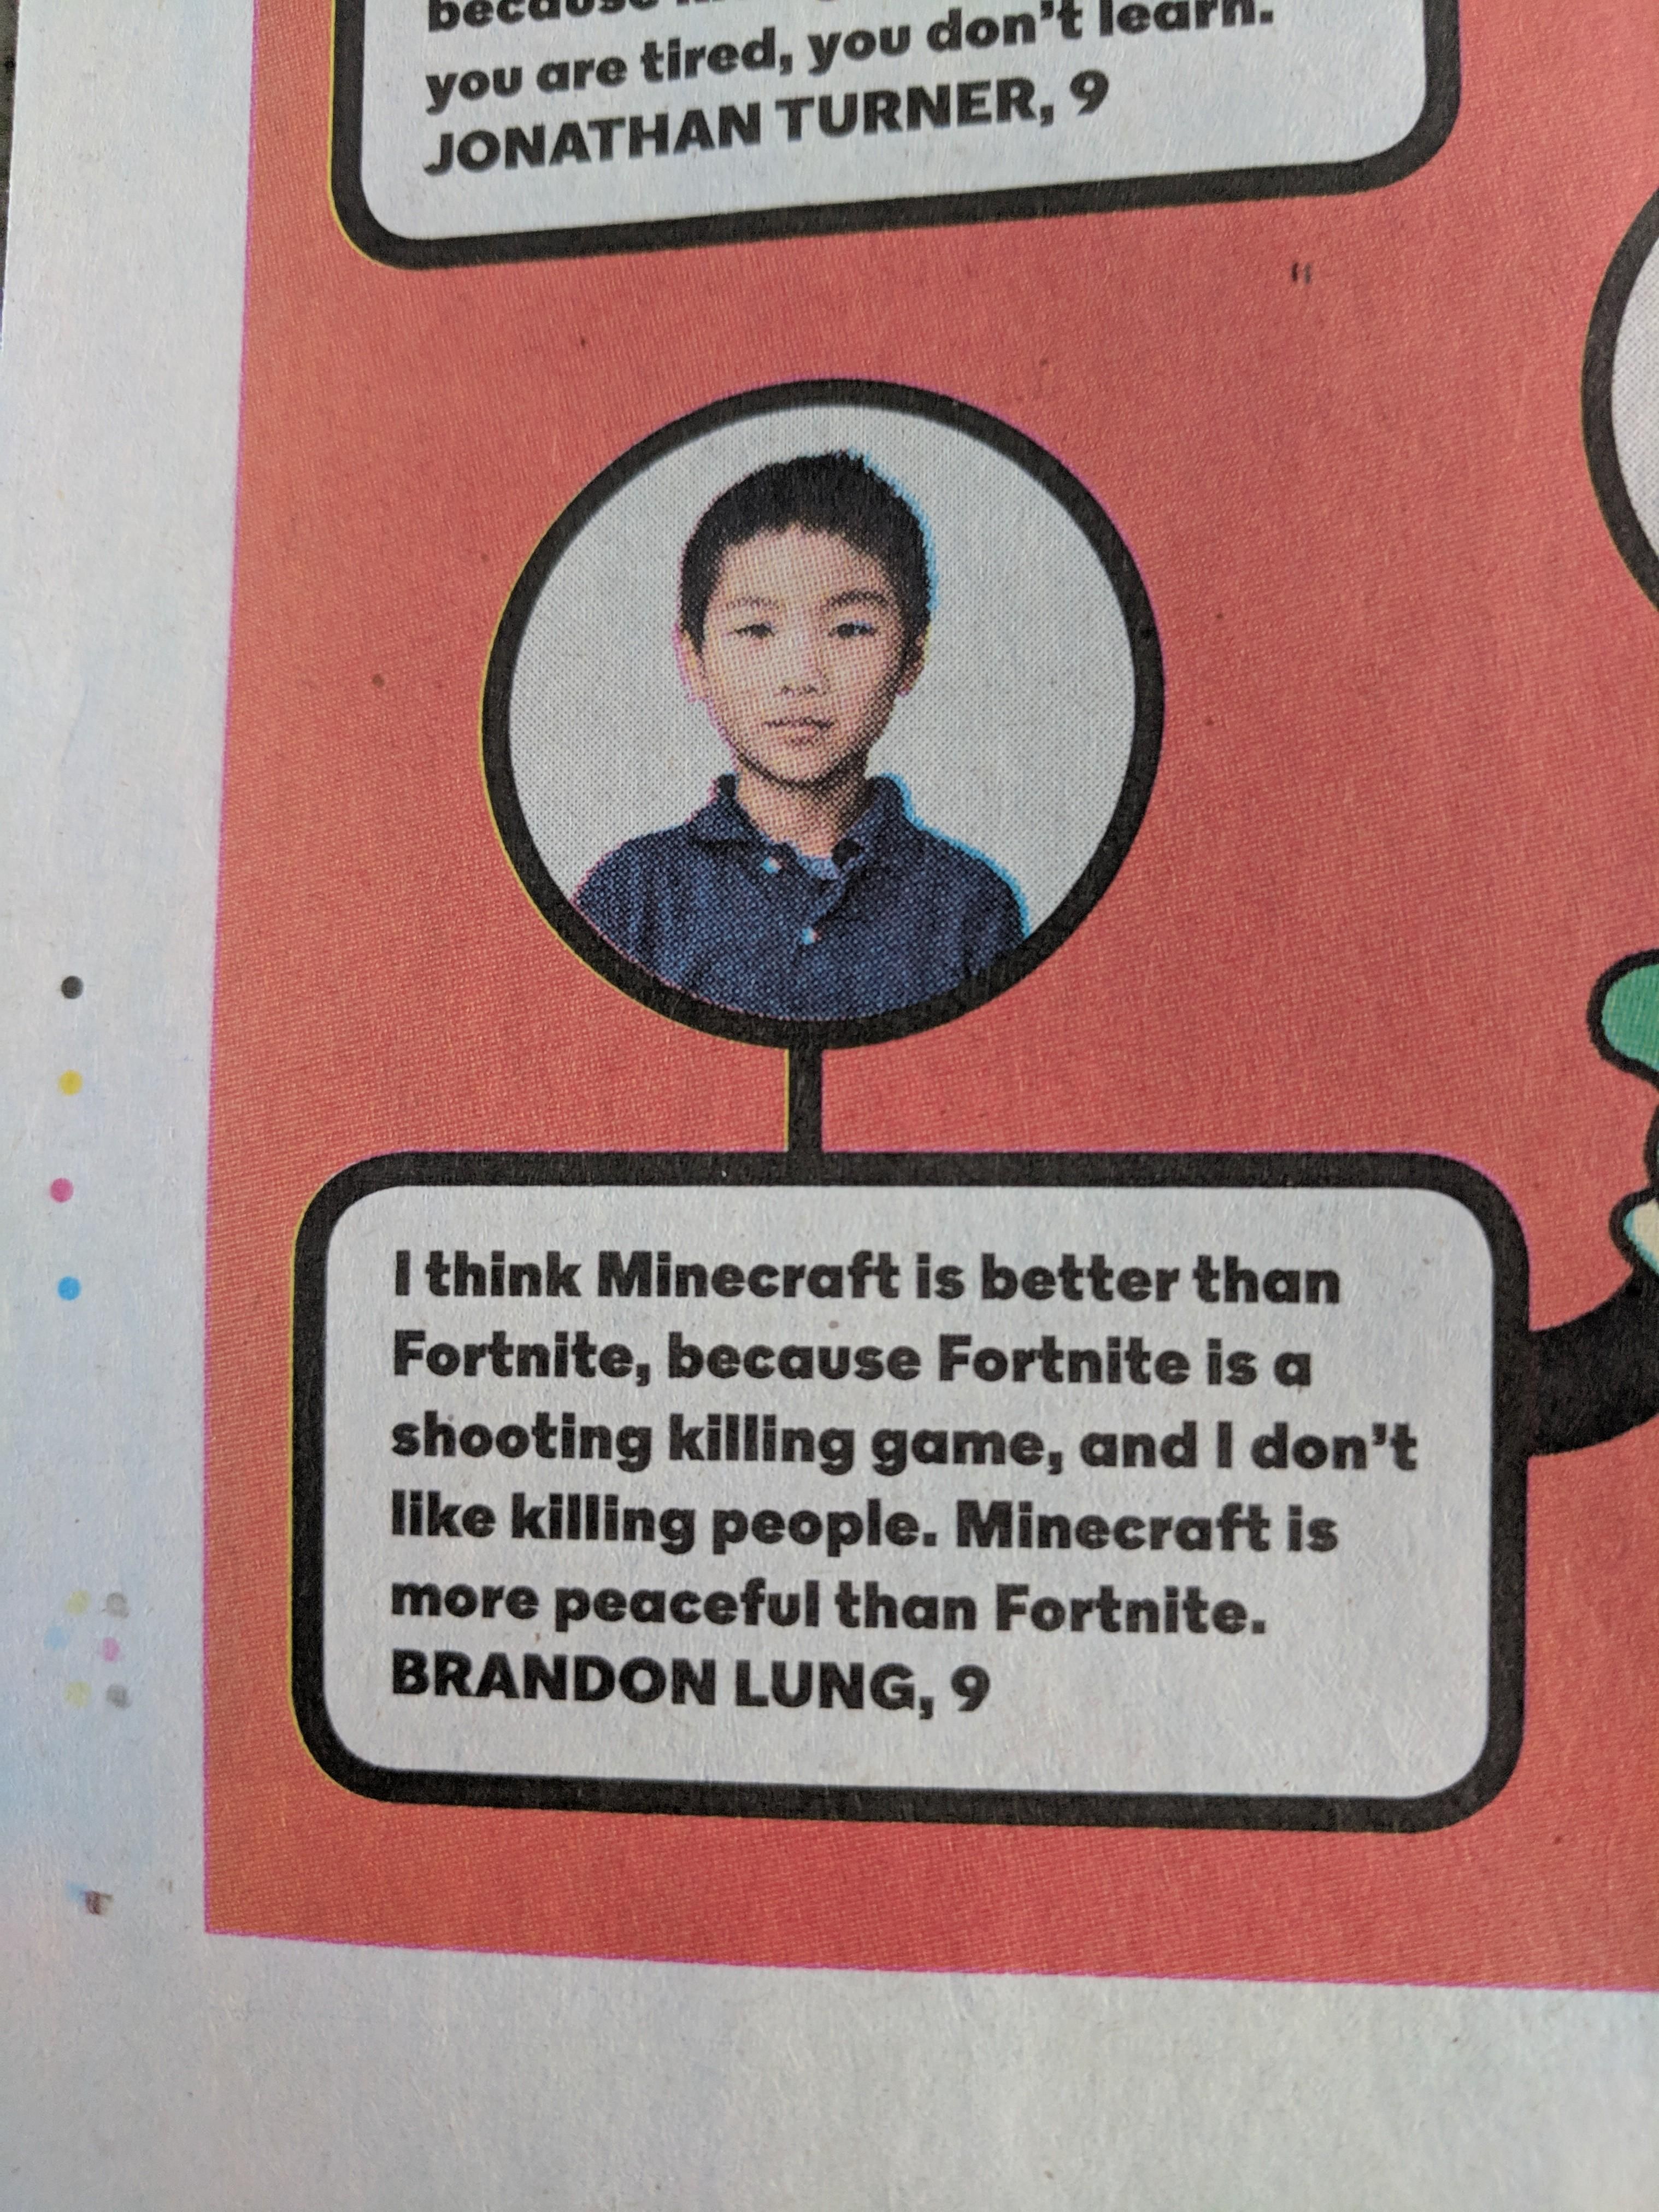 Found in the New York Times Kids Edition.